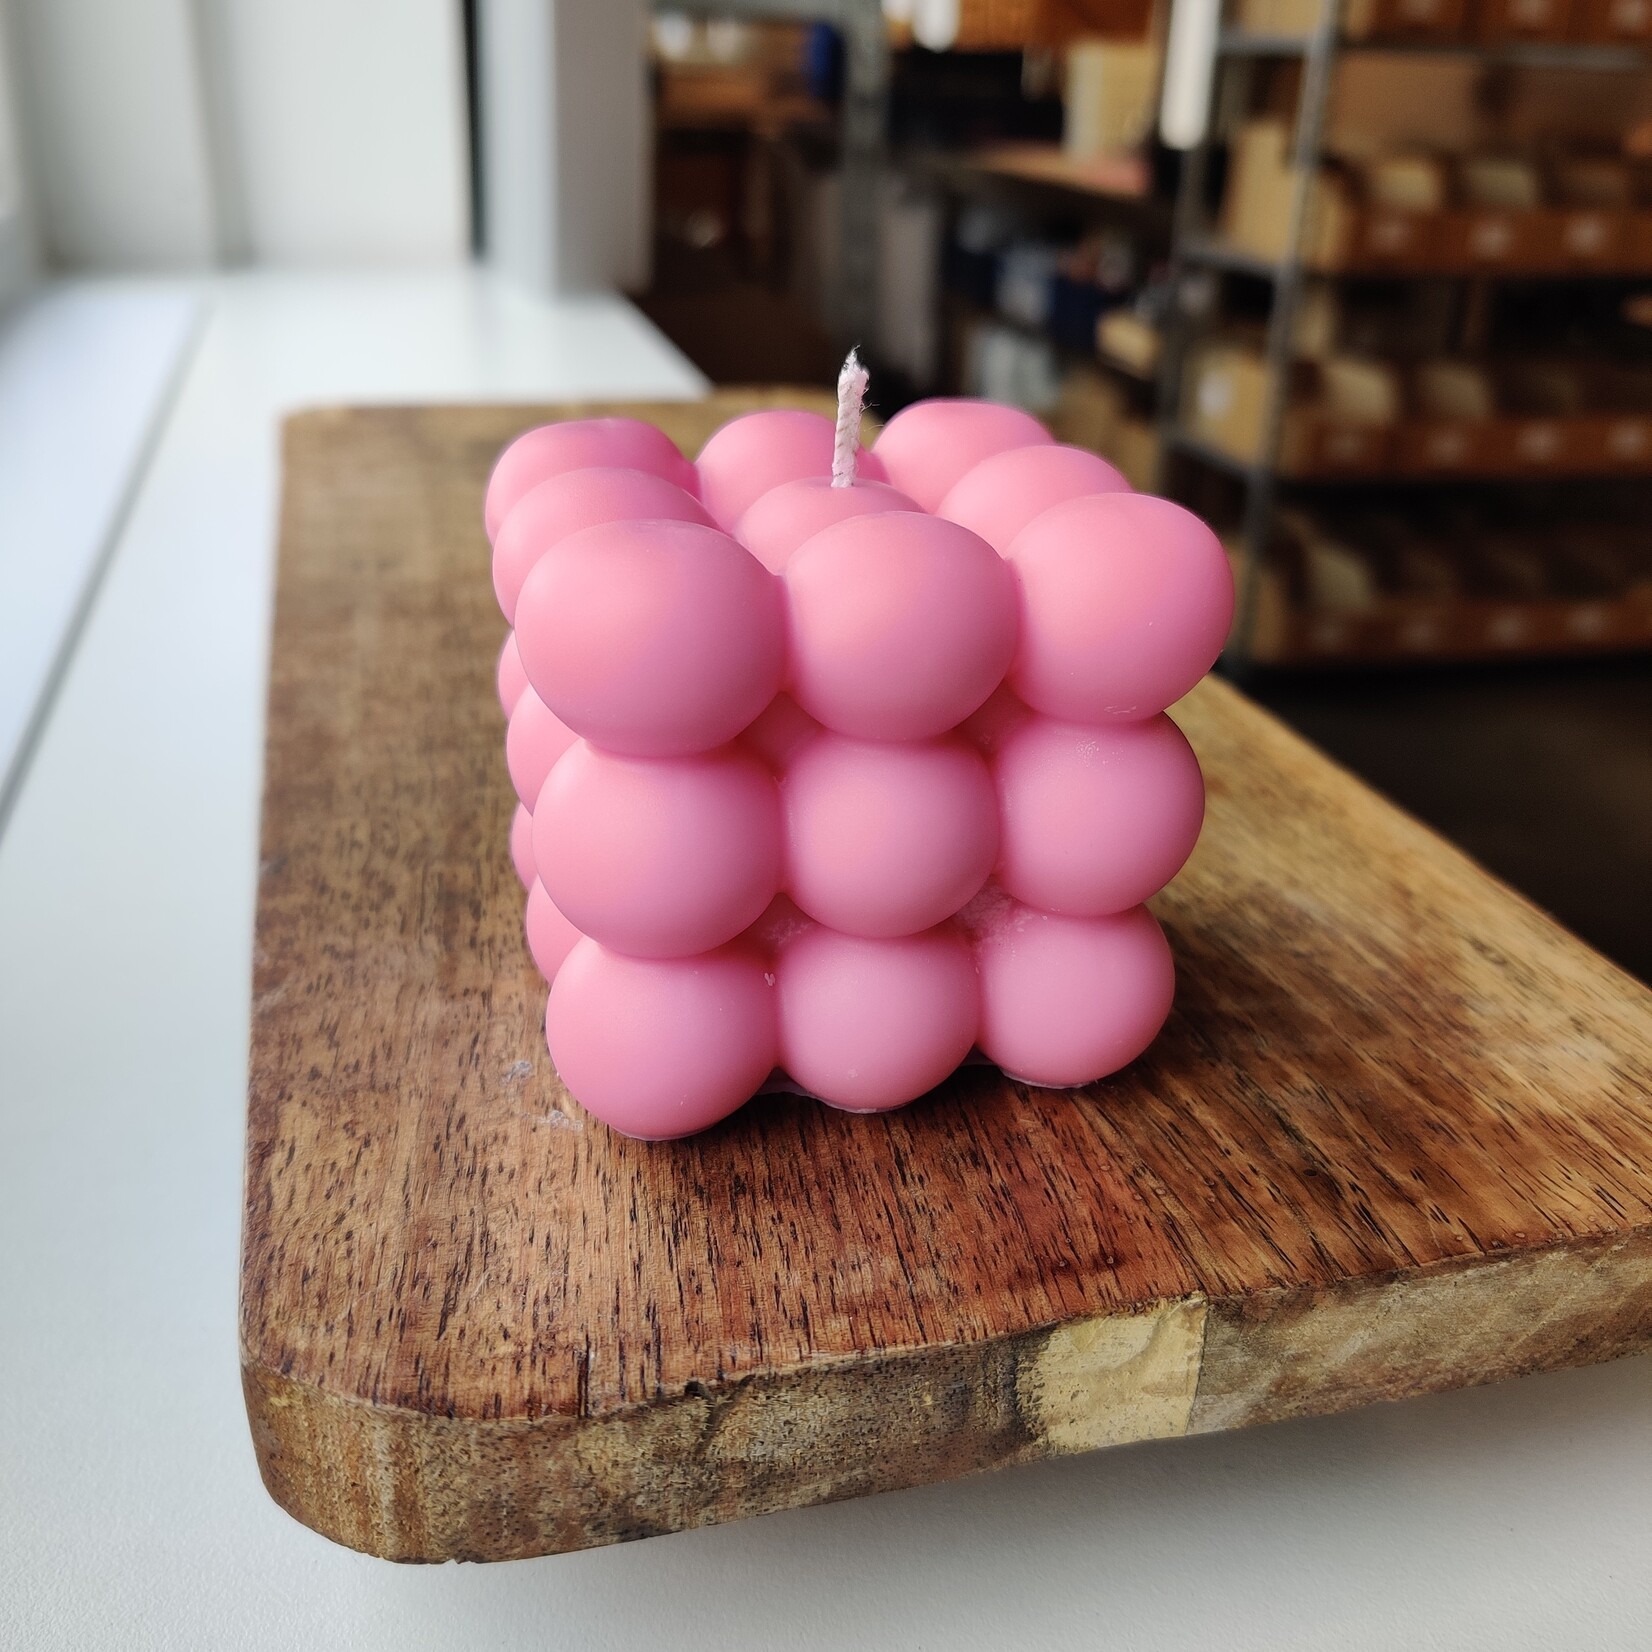 Rapeseed wax candle - bubble cube - pink